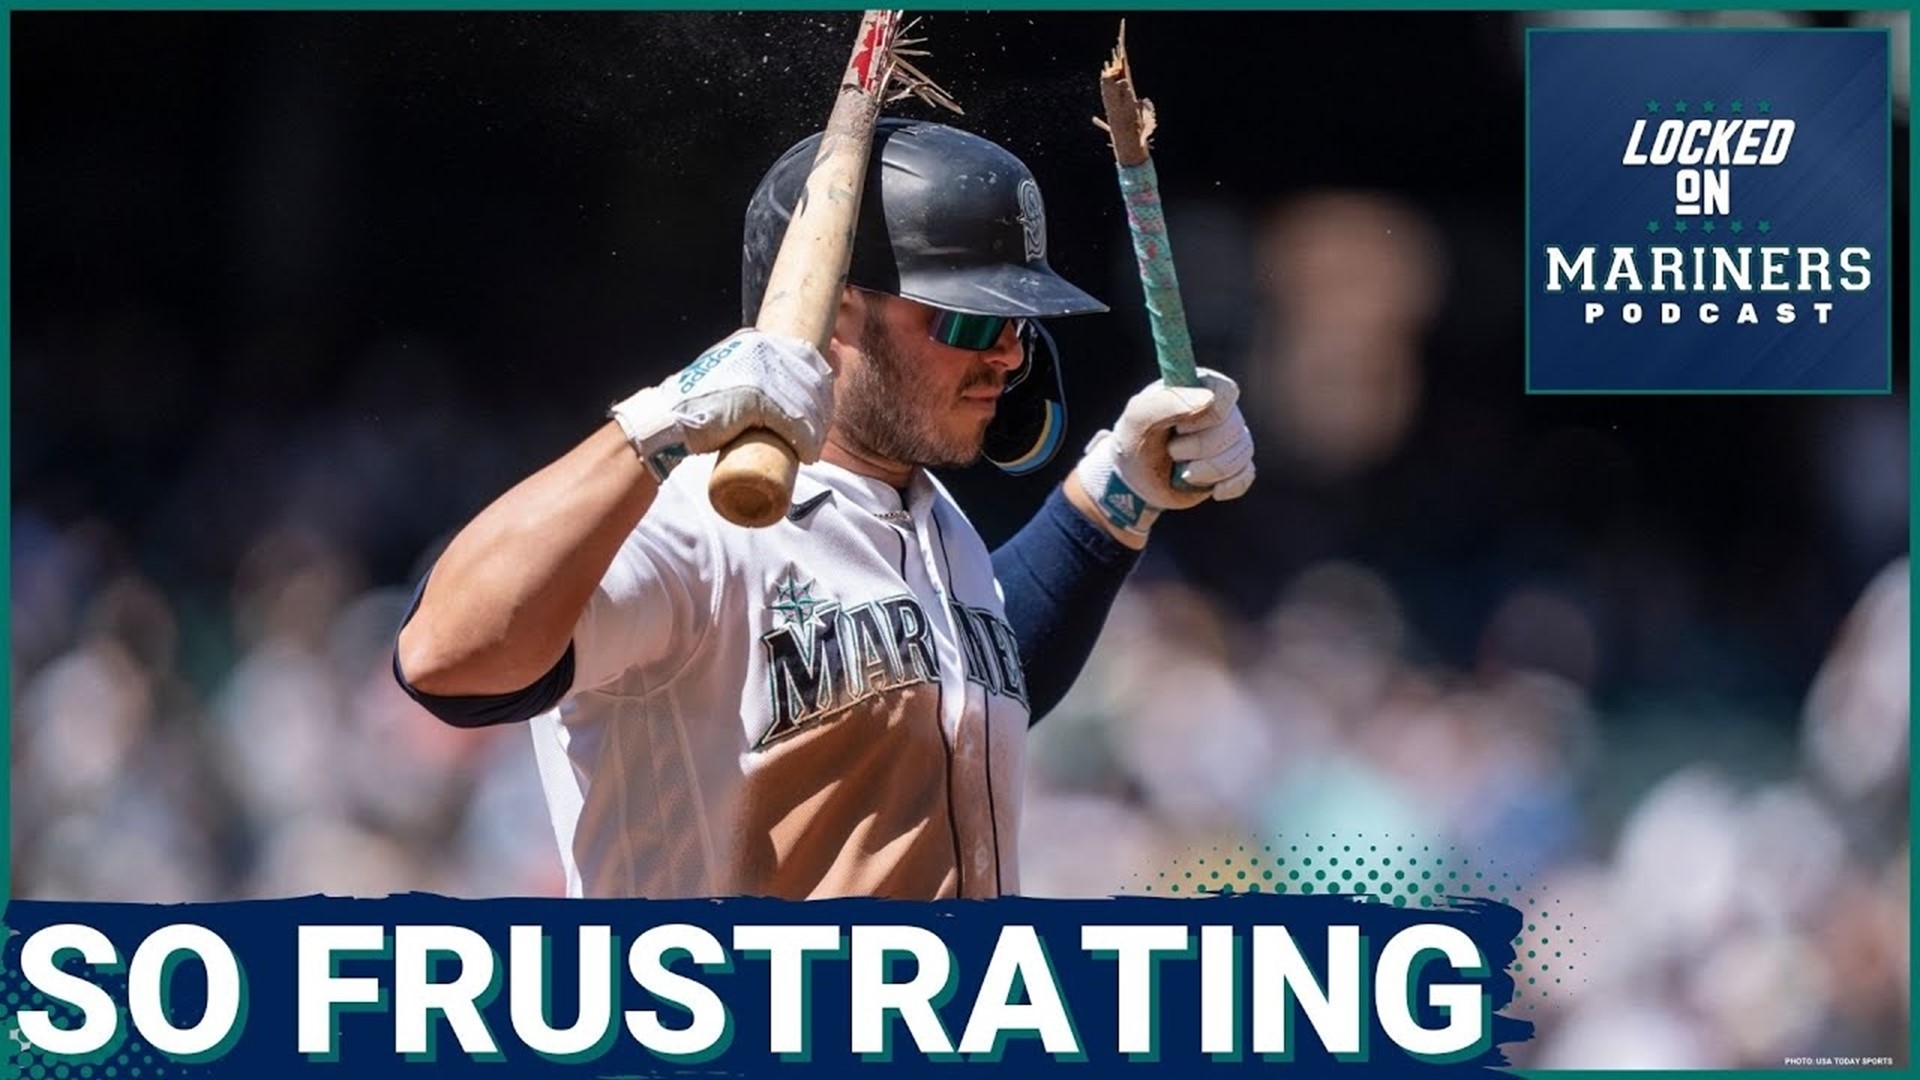 In a trend that has become all too familiar, the Mariners came to the plate late in the game with a chance to win, only to find themselves falling just 1 hit short.